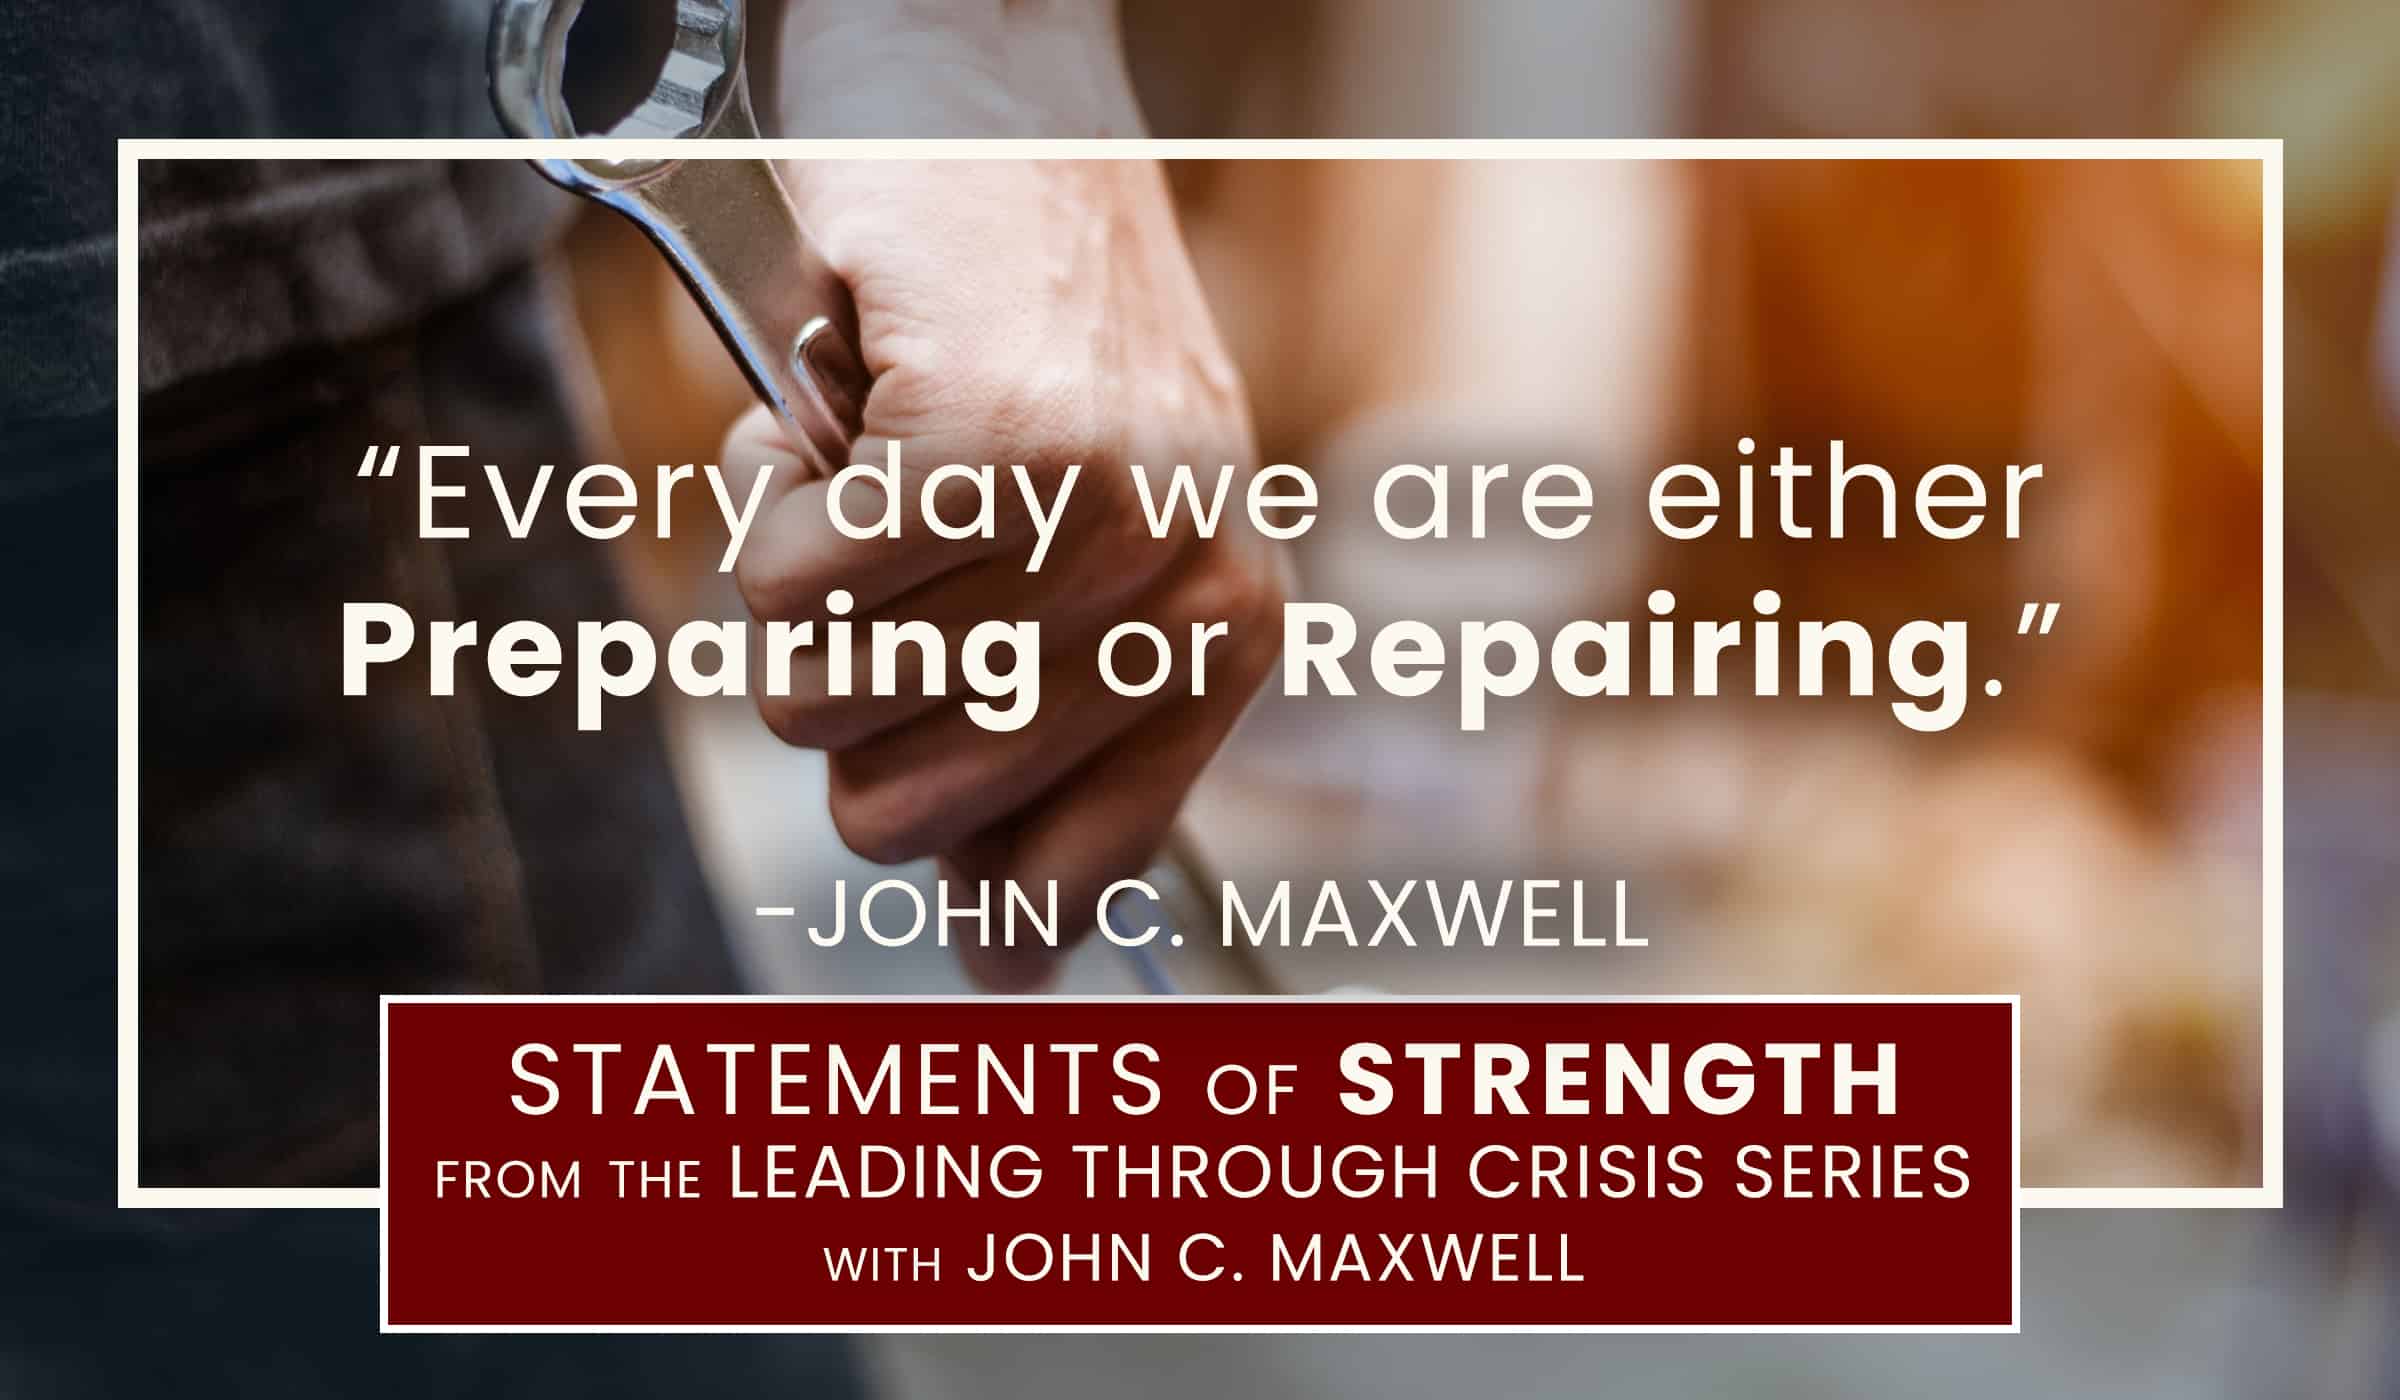 image of quote from john c maxwell